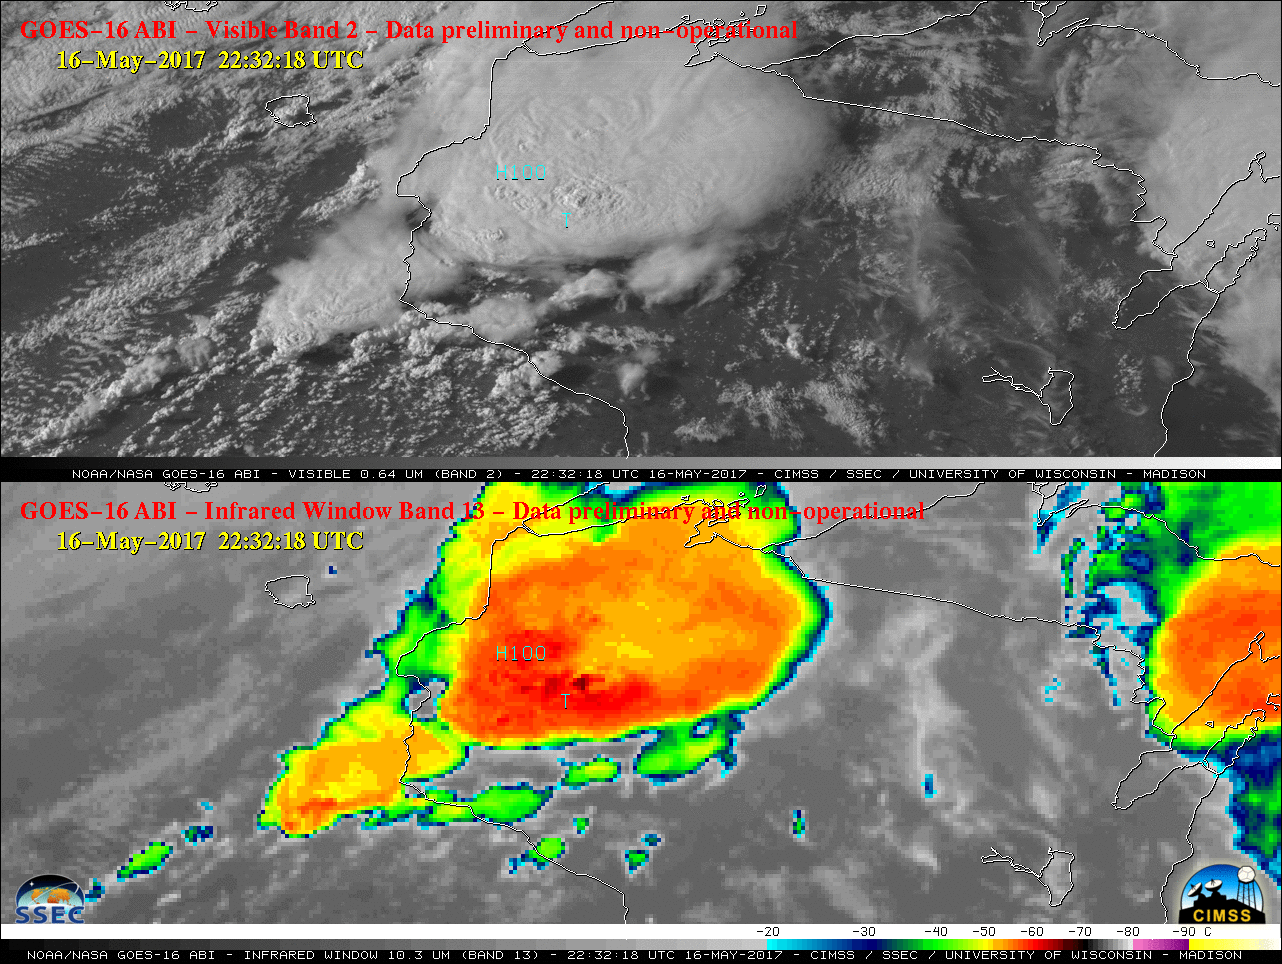 GOES-16 Visible (0.64 µm, top) and Infrared Window (10.3 µm, bottom) images, with SPC storm reports plotted in cyan [click to play animation]